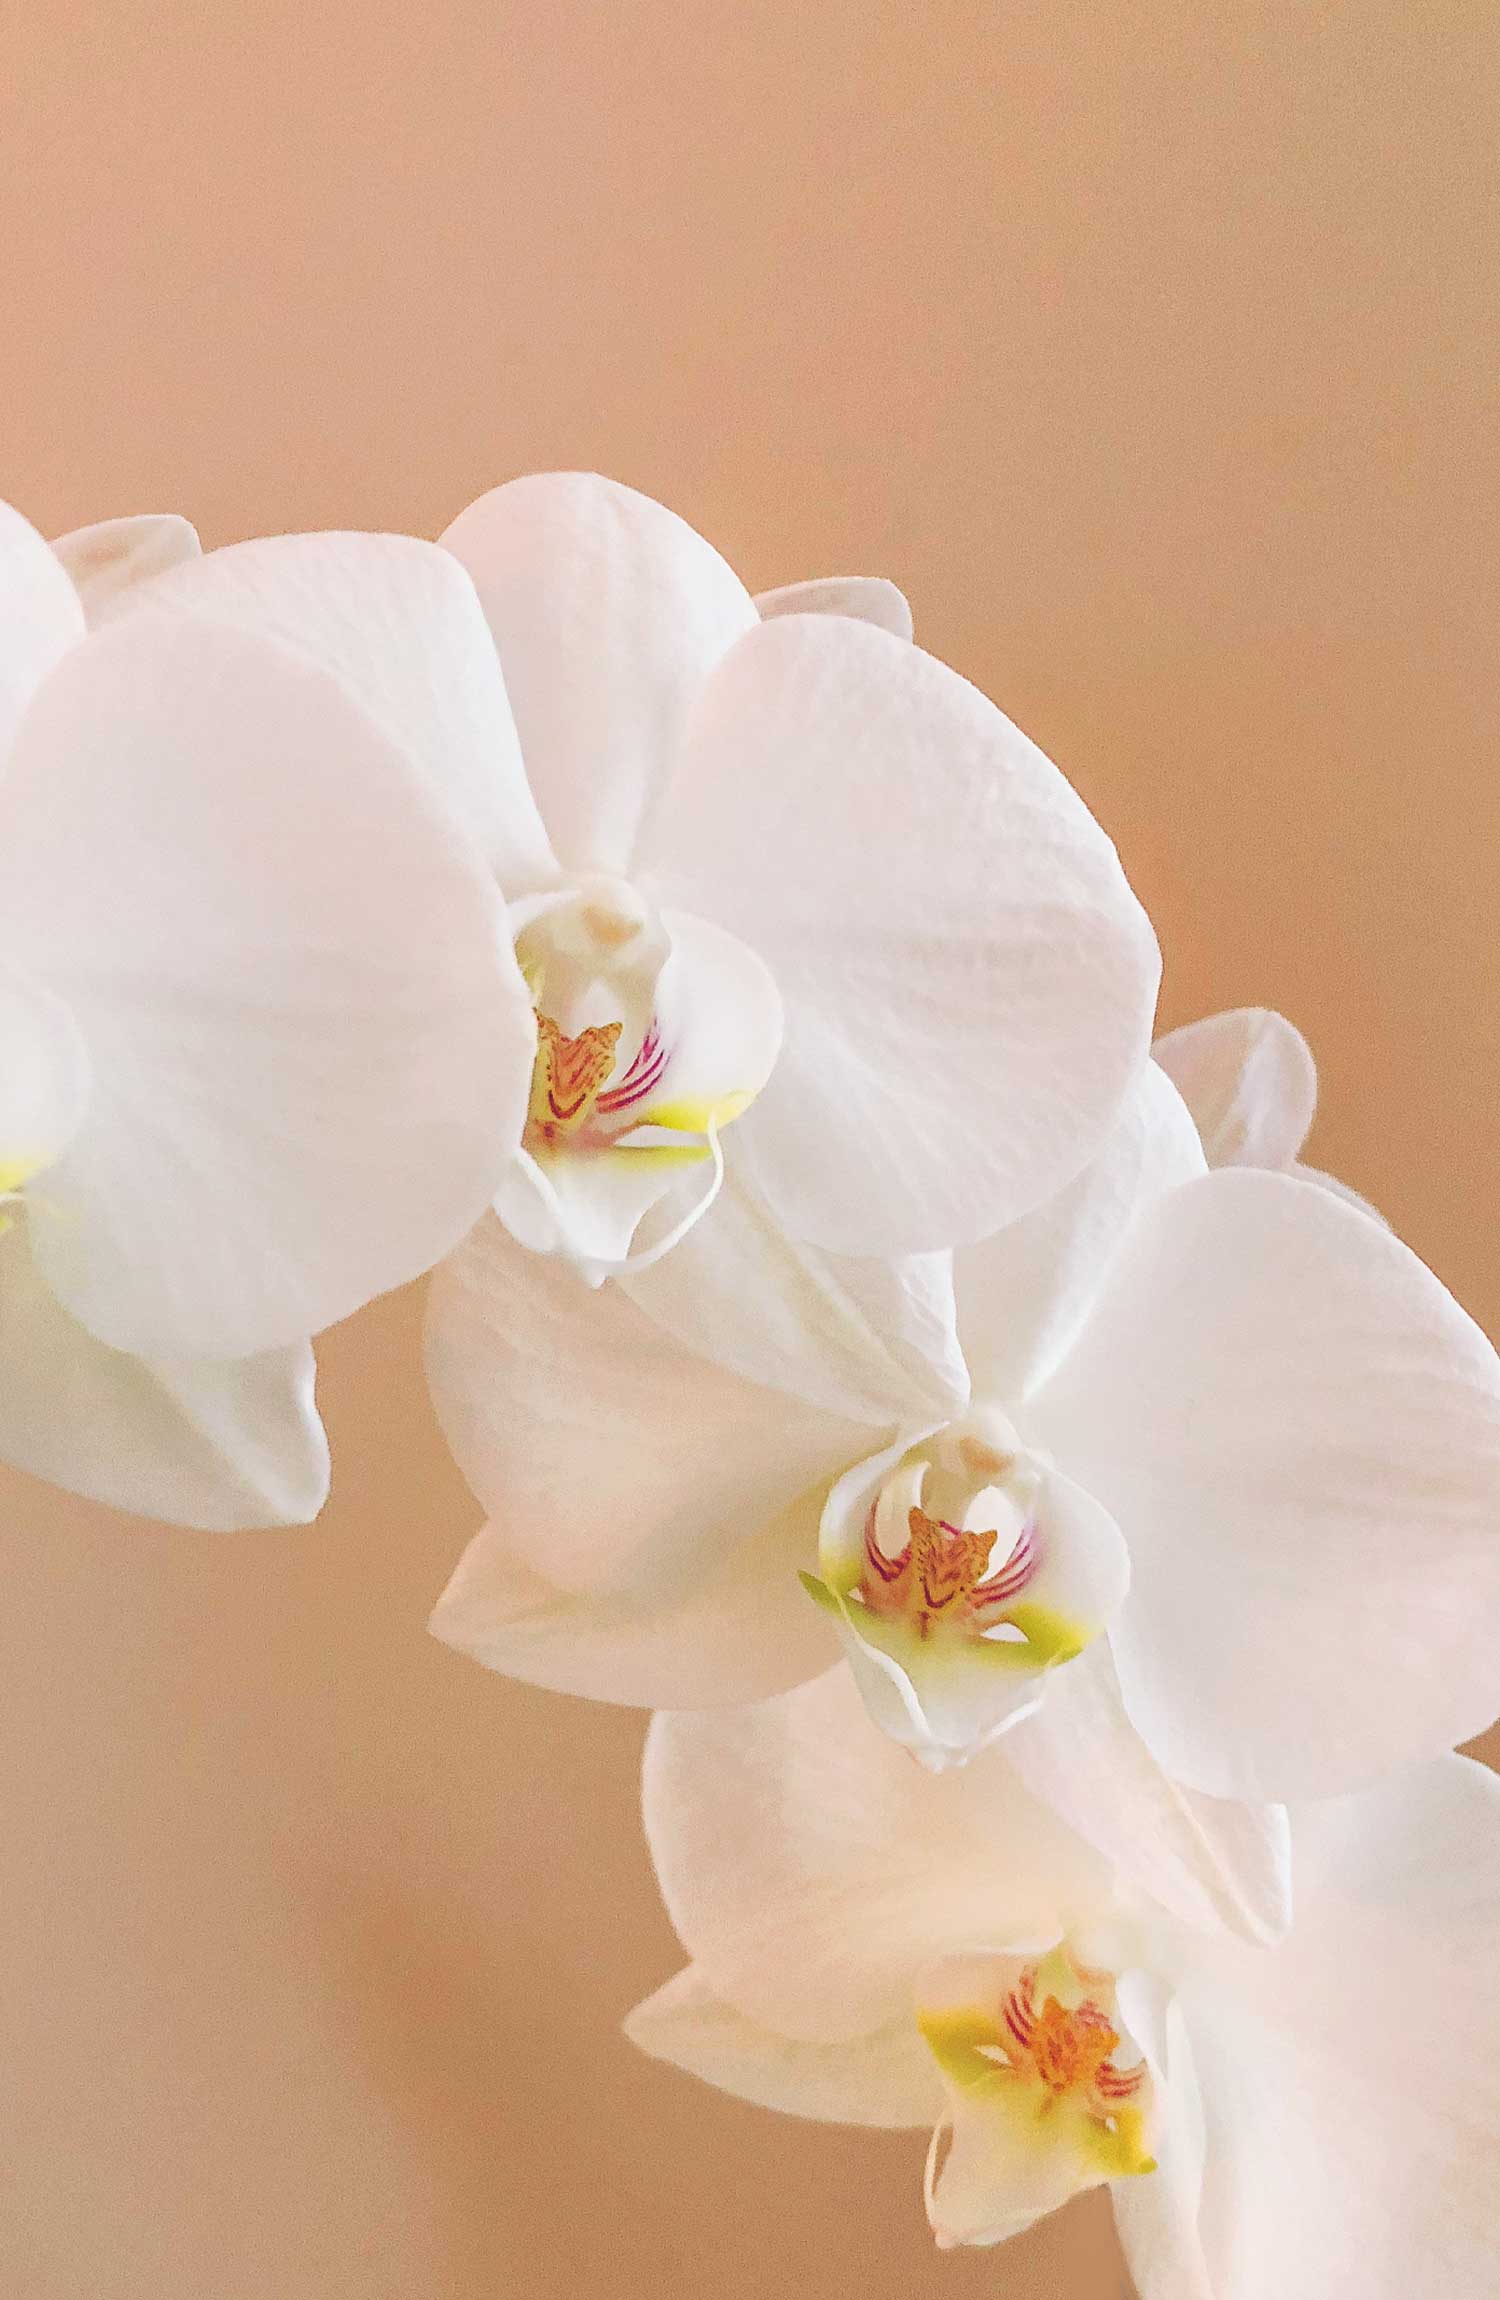 A close up of the flower of a white Phalaenopsis orchid.